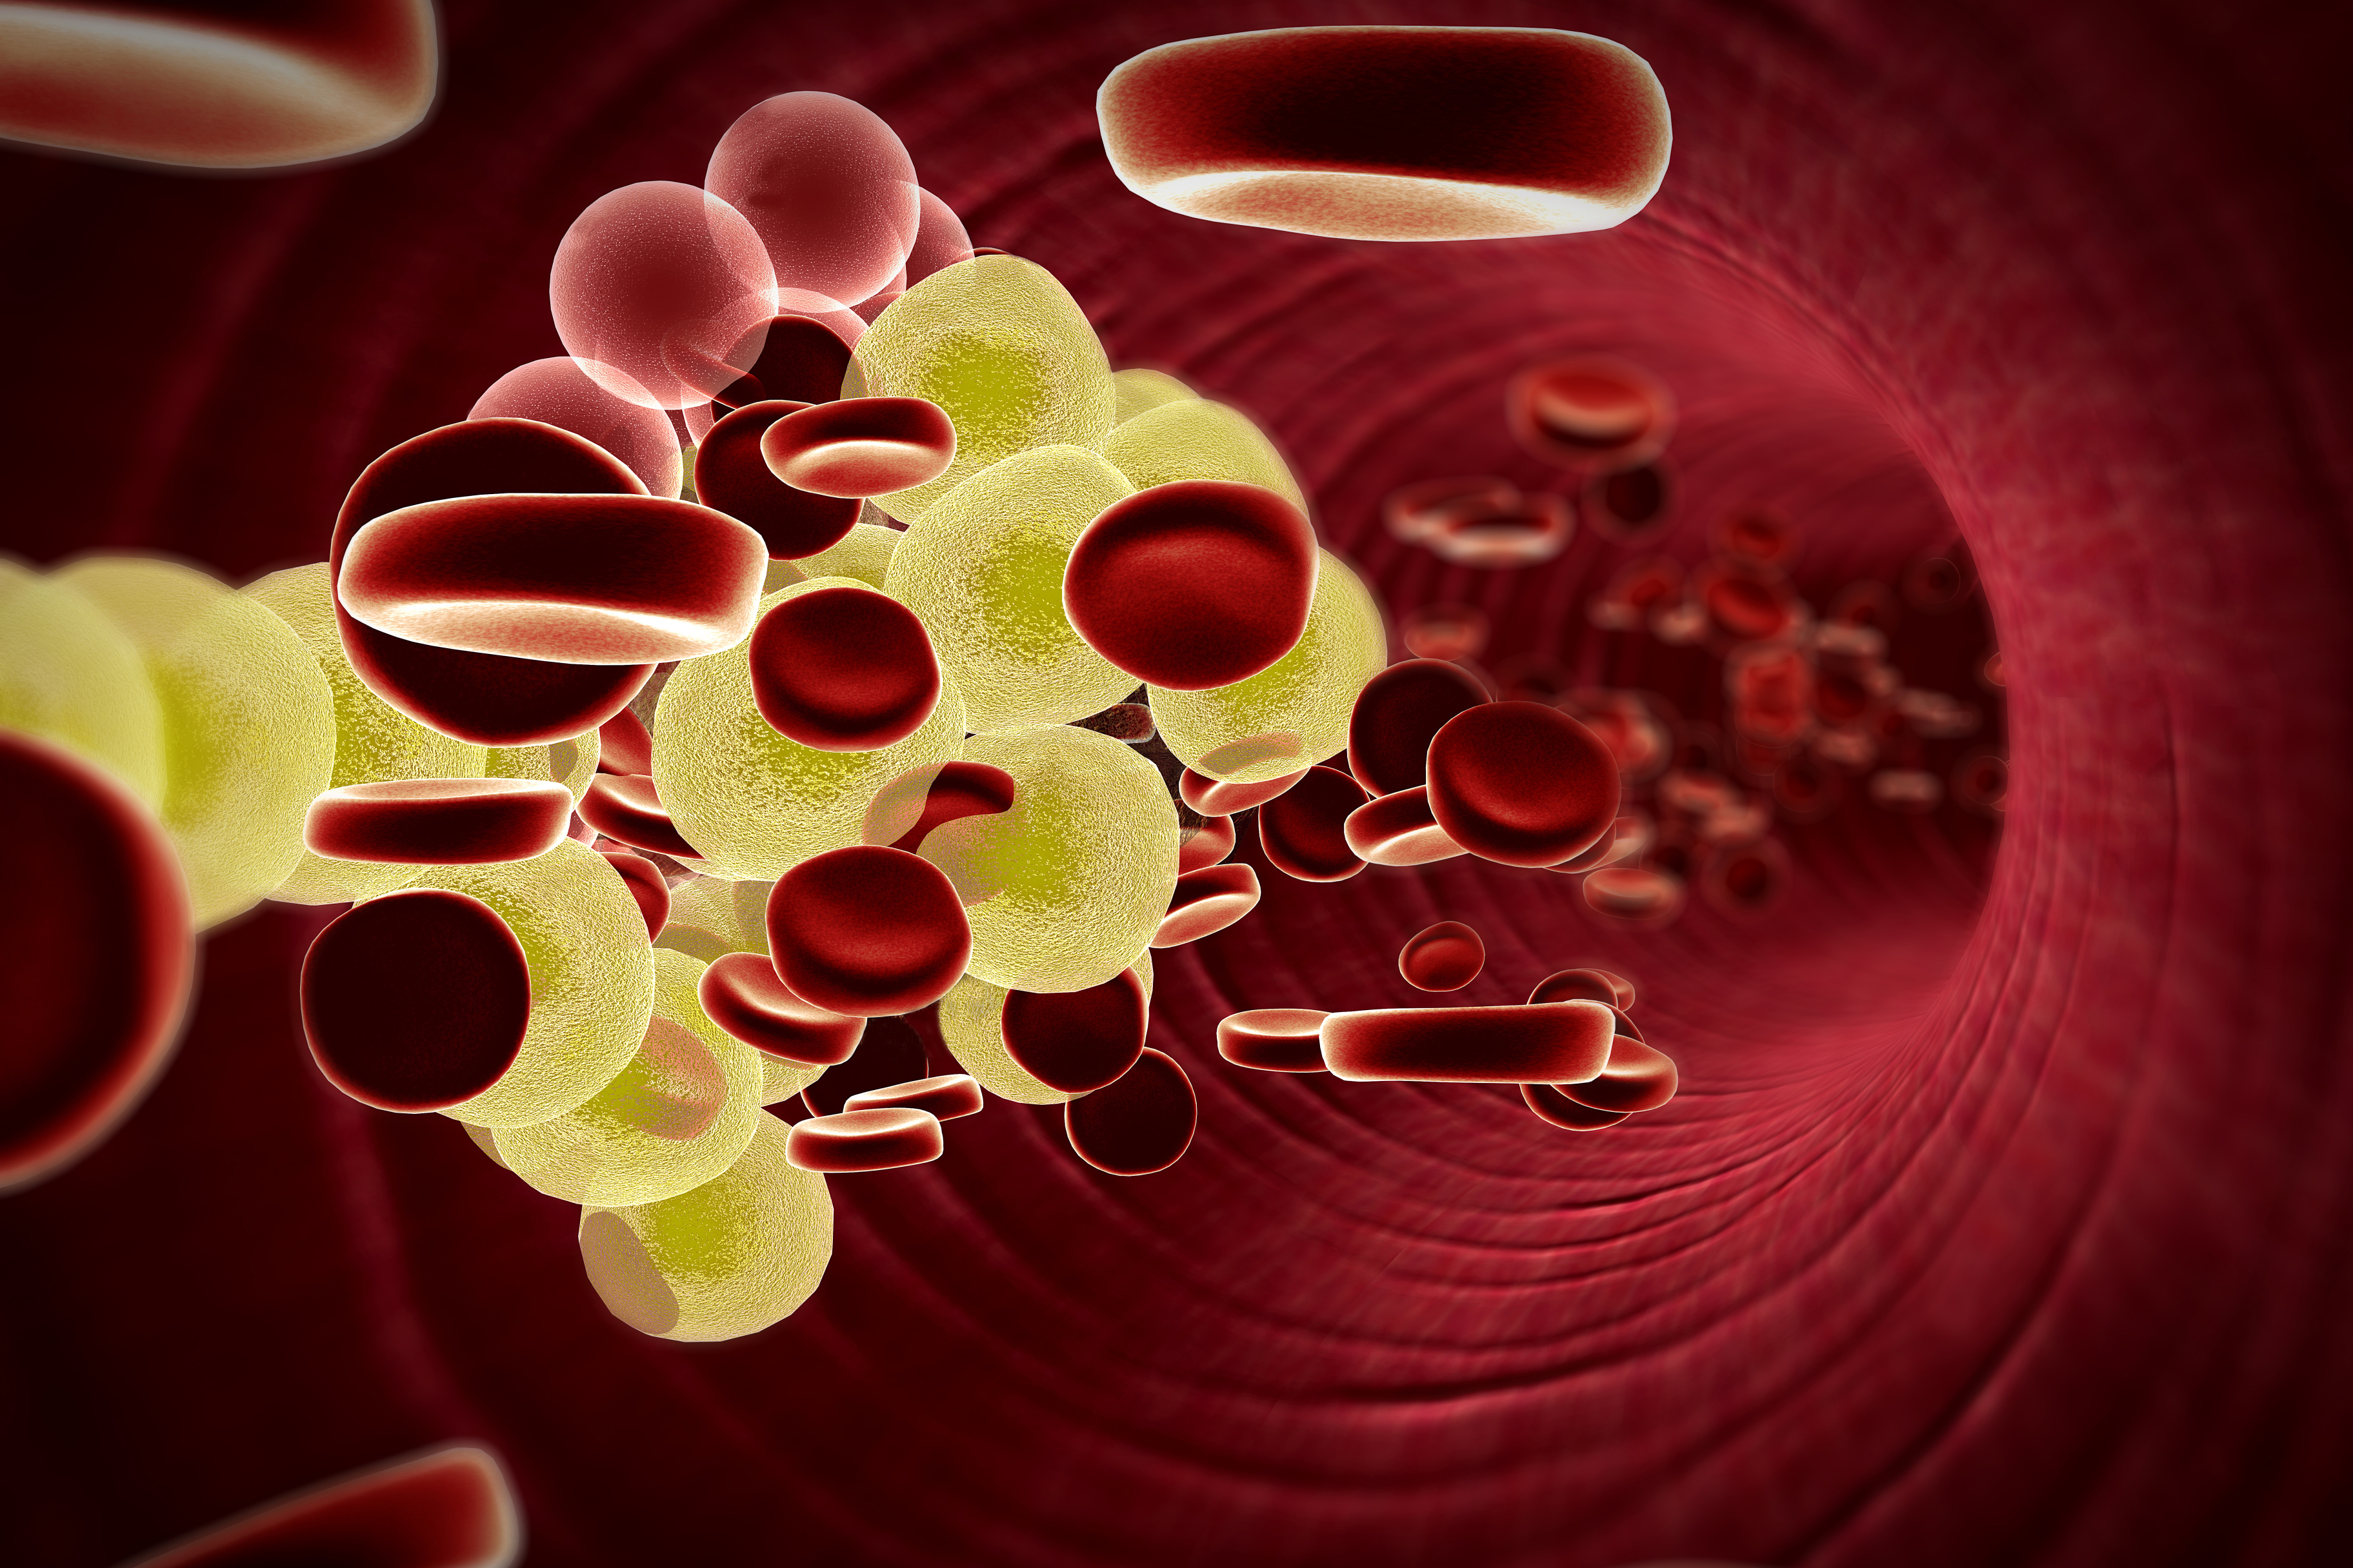 Illustration of red blood cells and cholesterol going through the vein of a person